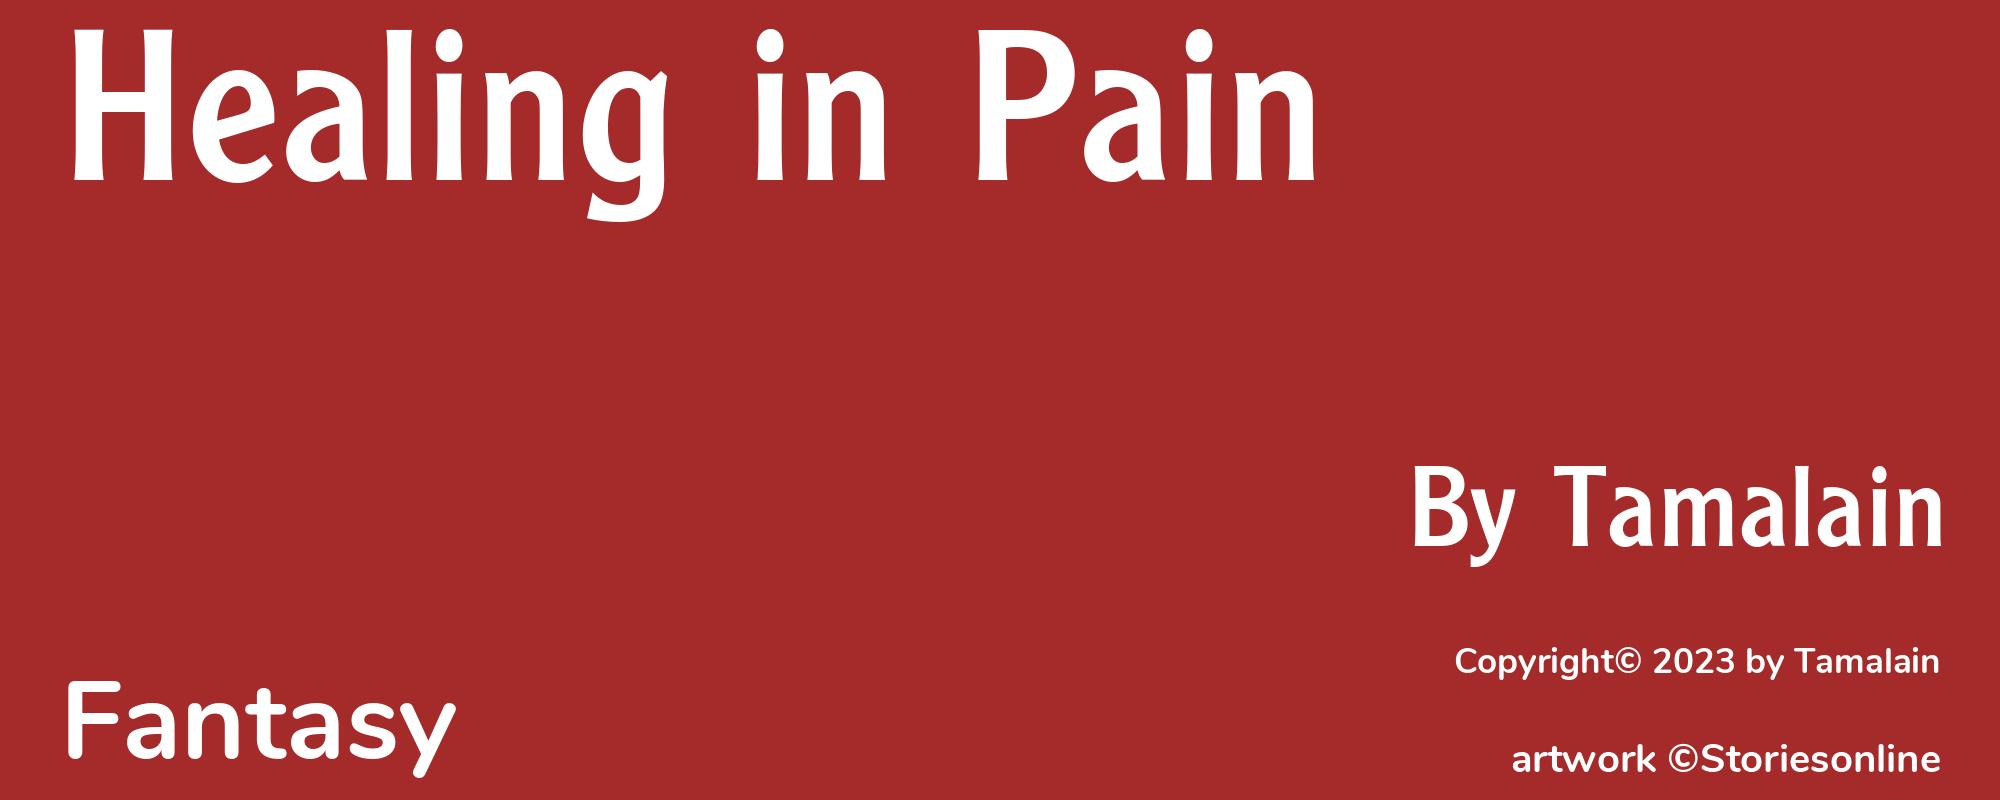 Healing in Pain - Cover